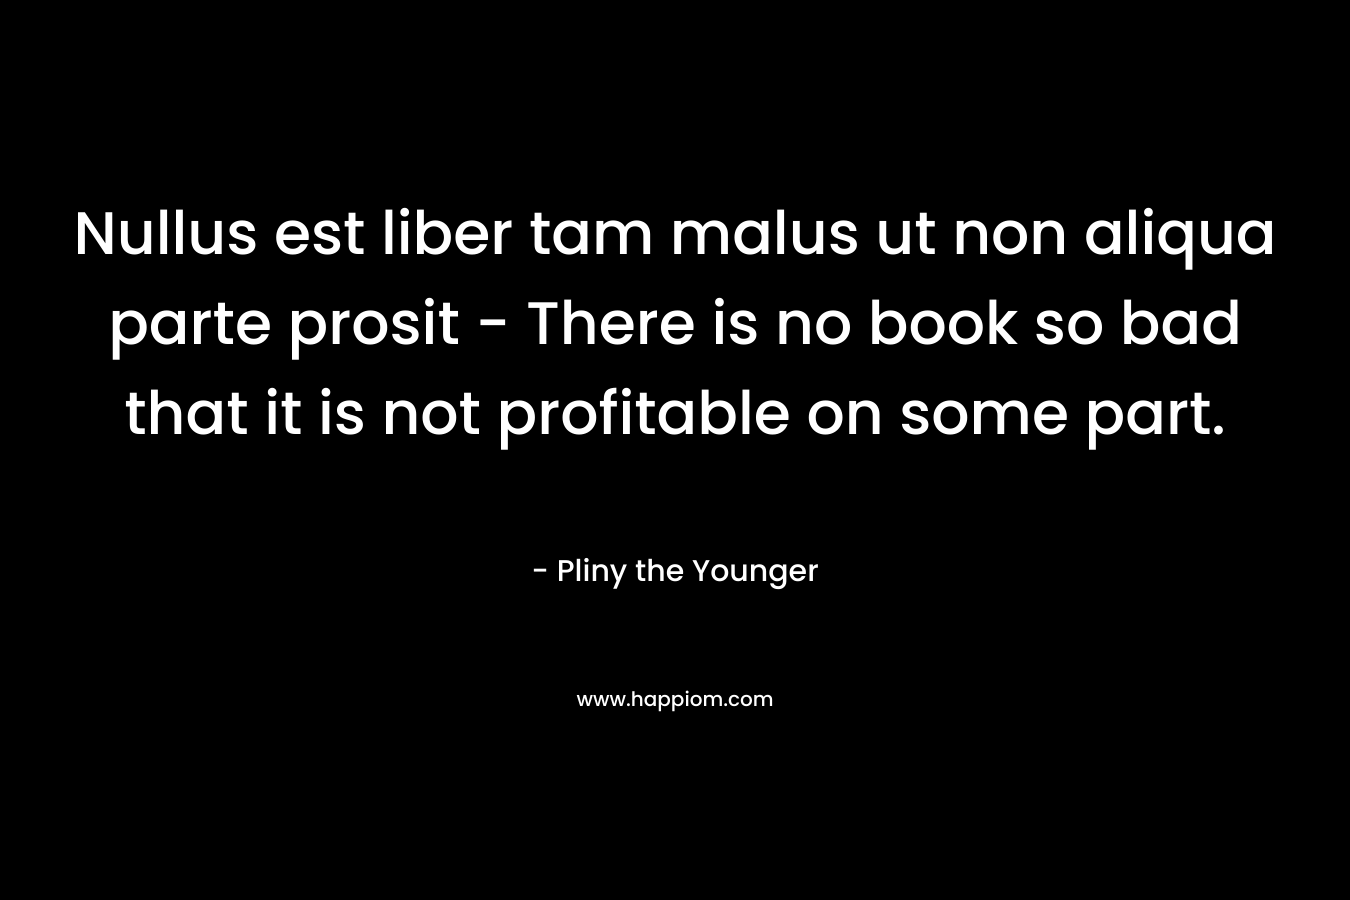 Nullus est liber tam malus ut non aliqua parte prosit – There is no book so bad that it is not profitable on some part. – Pliny the Younger